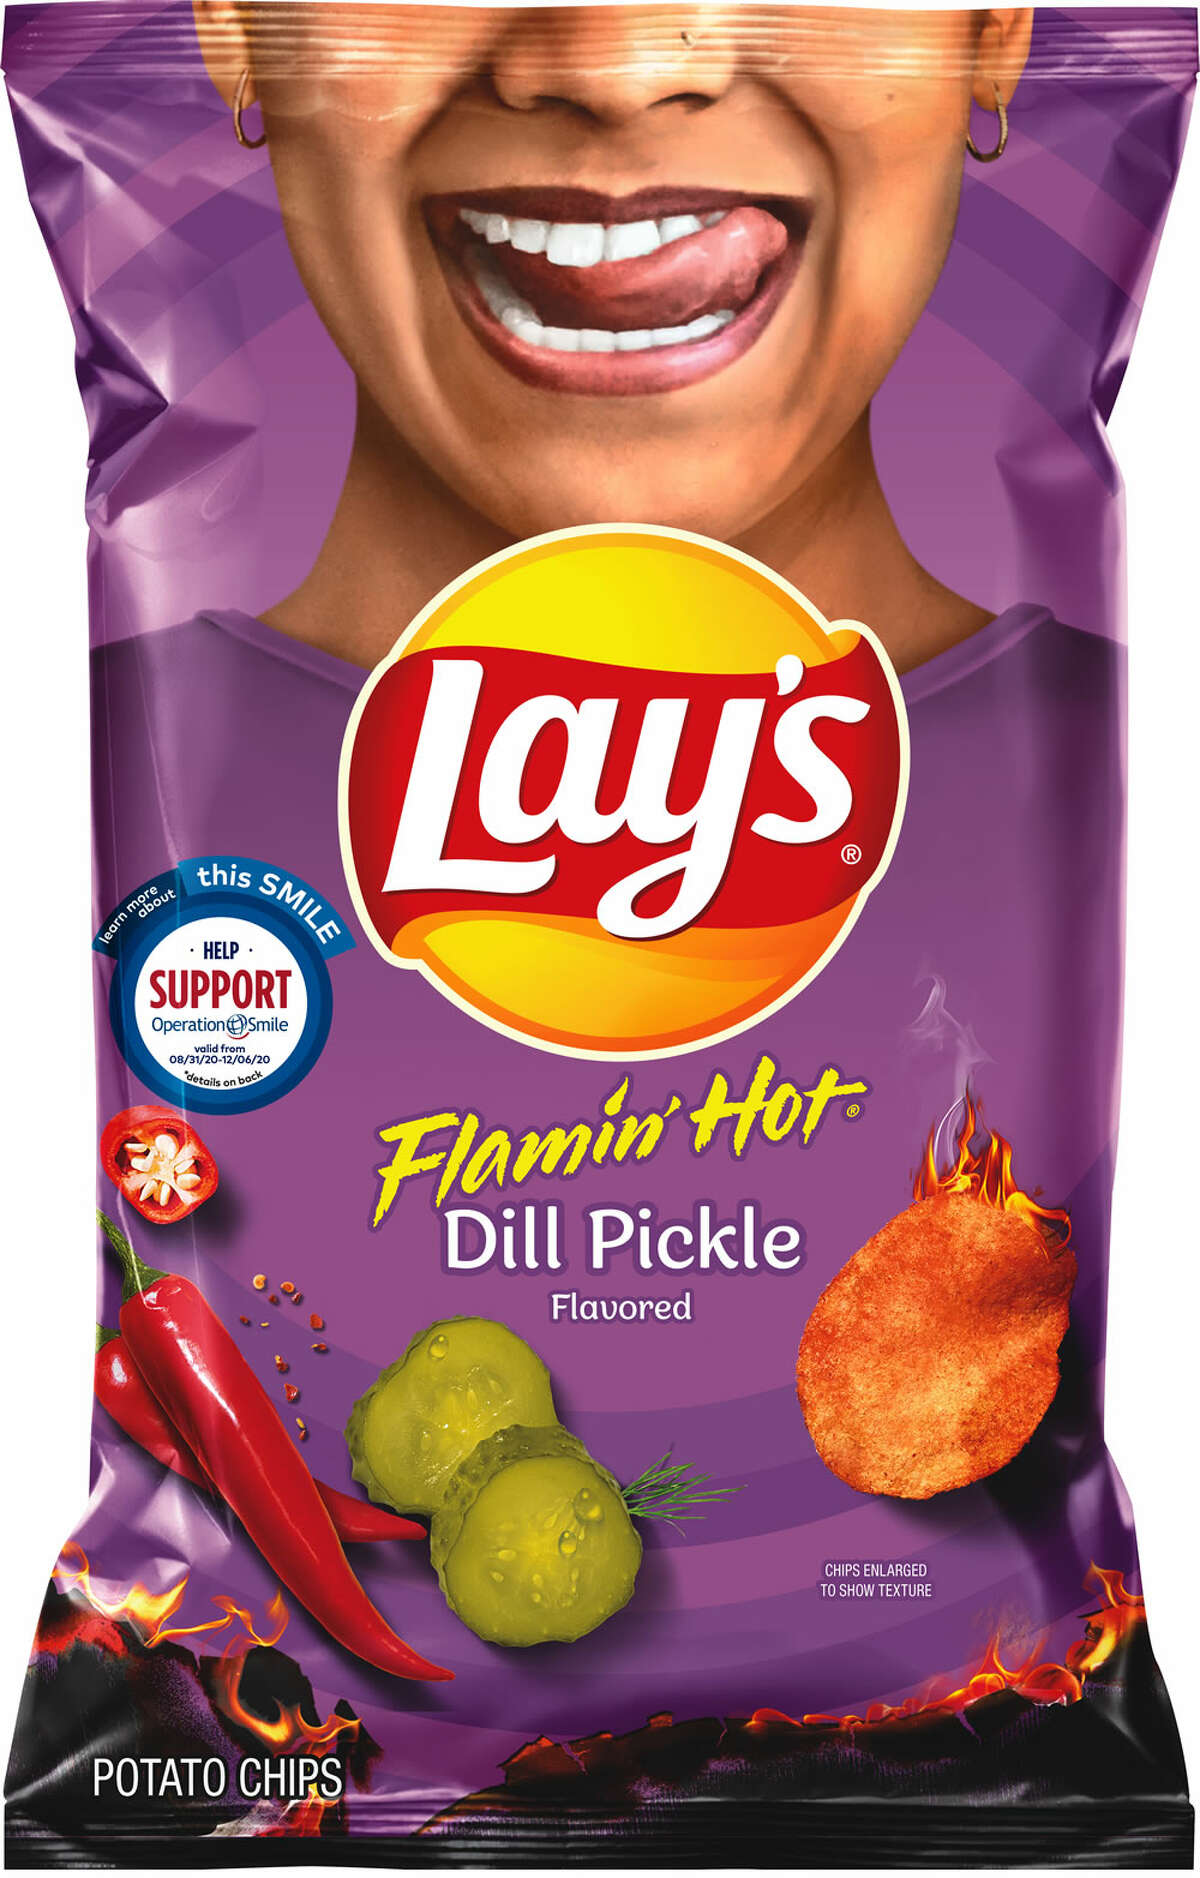 Lay's recently selected Mona Patel, founder of San Antonio amputee foundation, to be featured on one of its potato chip bags due to her "actively spreads joy."